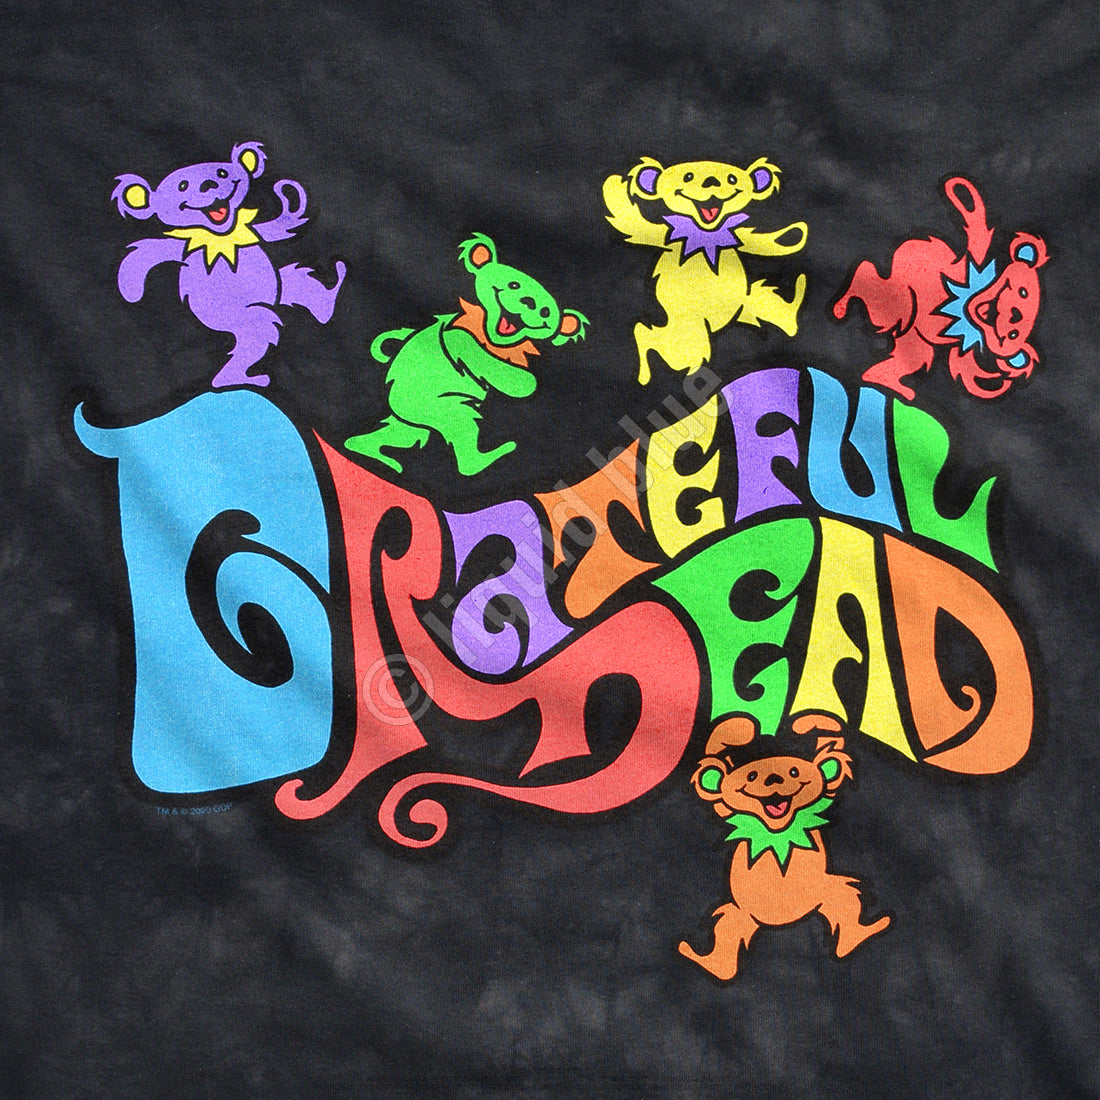 The best selling] Grateful Dead Bear Tiedye All Over Print